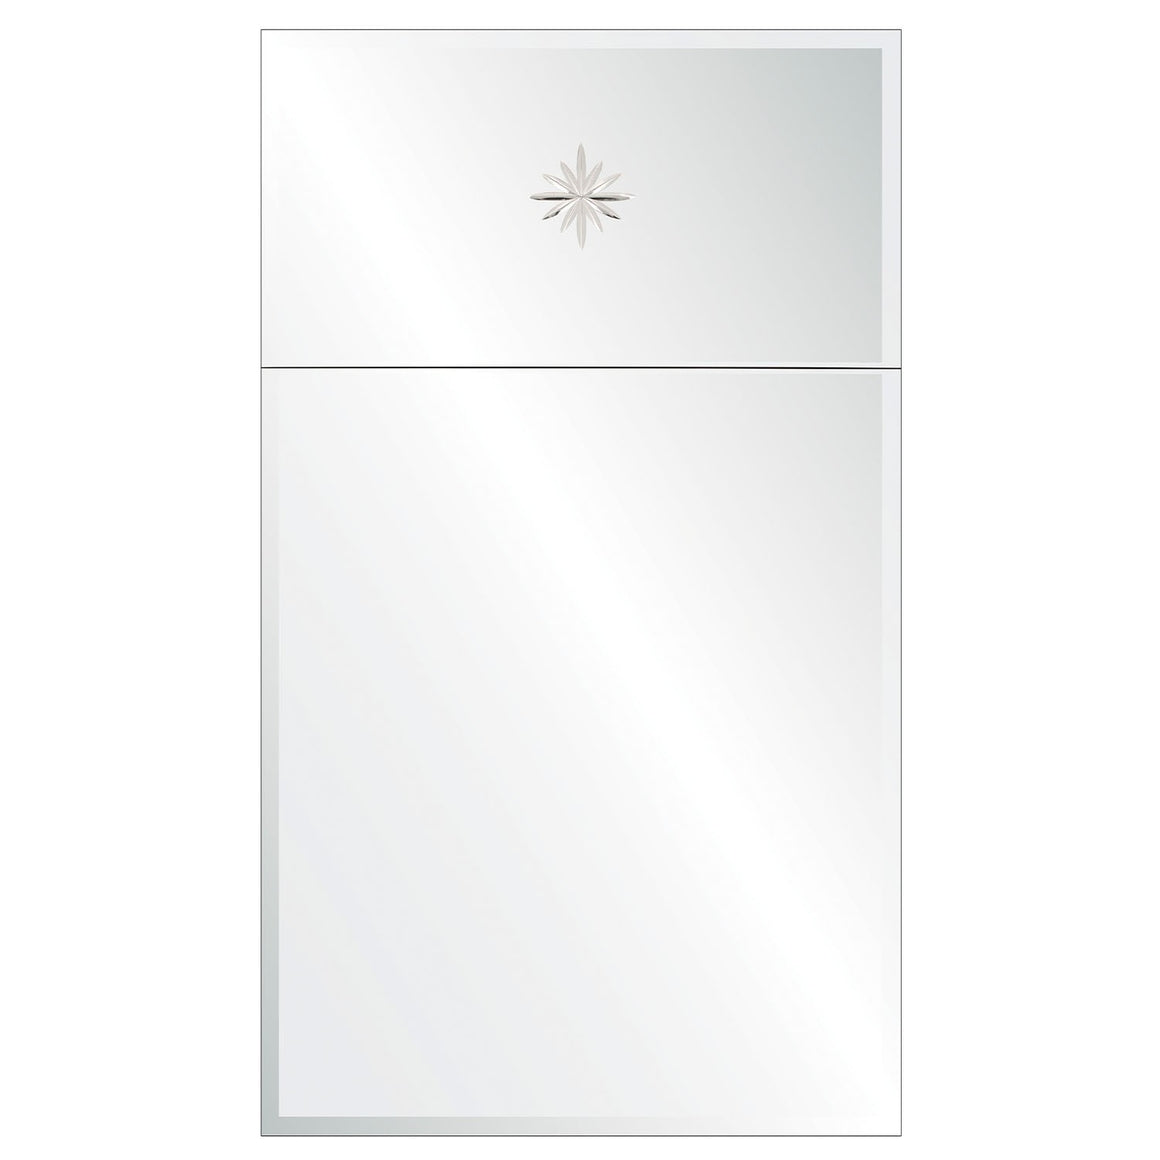 Mirrored Trumeau Mirror with Etched Star - Available in 2 Sizes